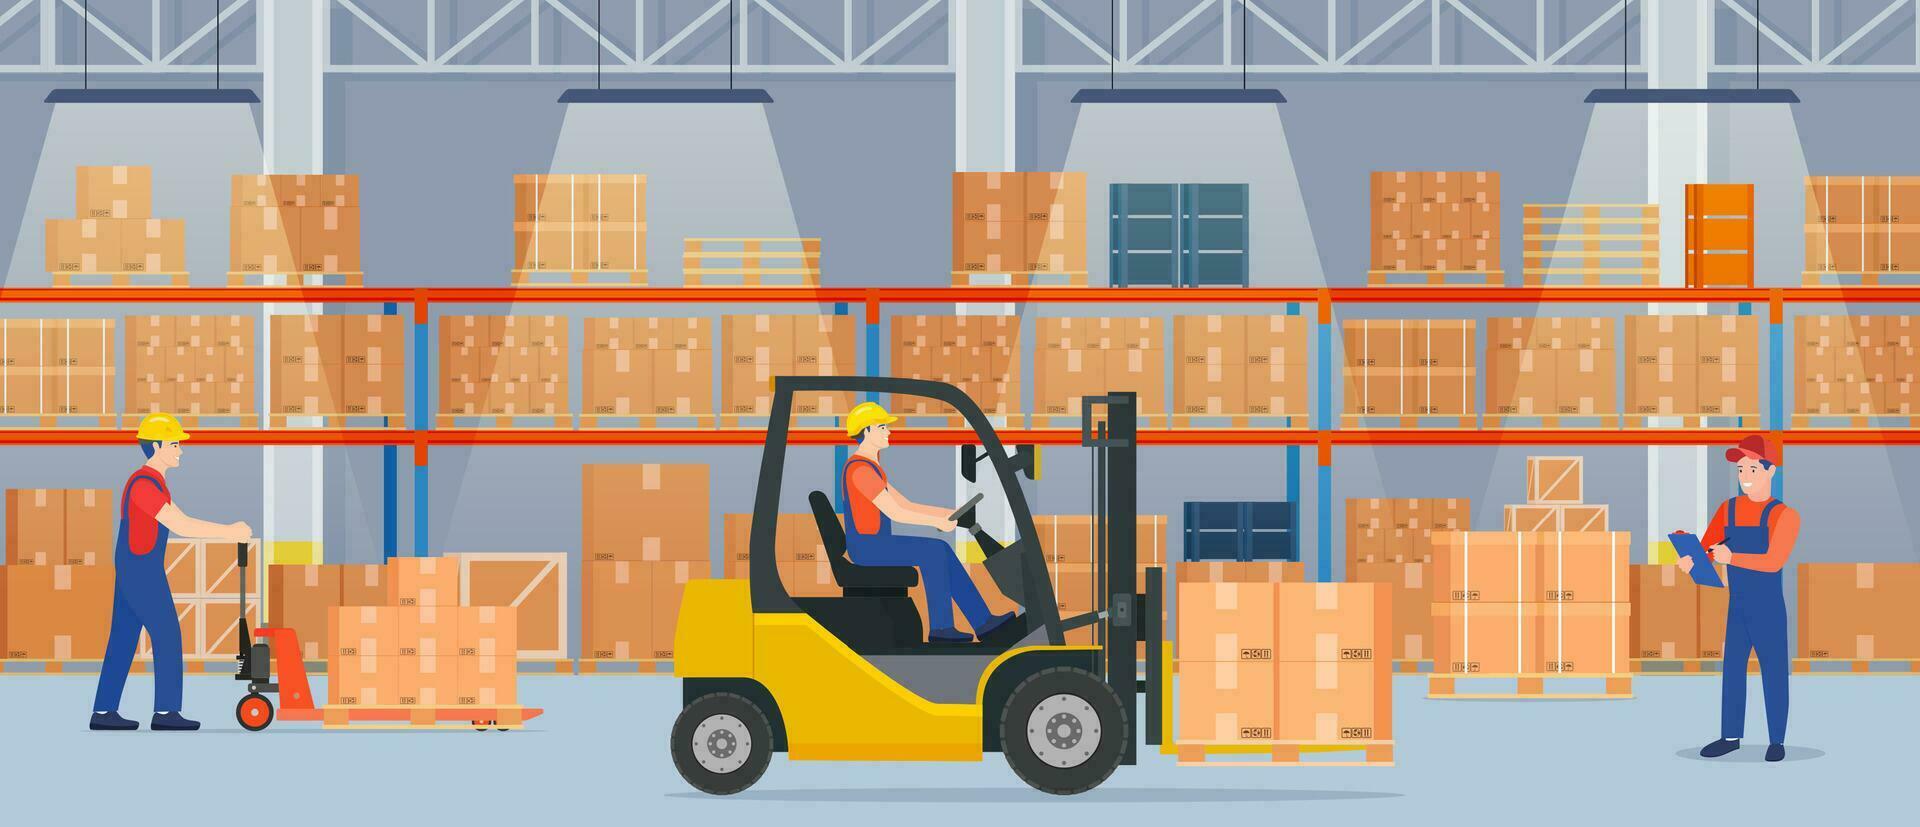 Warehouse interior with cardboard boxes on metal racks. Warehouse interior with goods, pallet trucks, forklift truck and container package boxes. Vector illustration in flat style